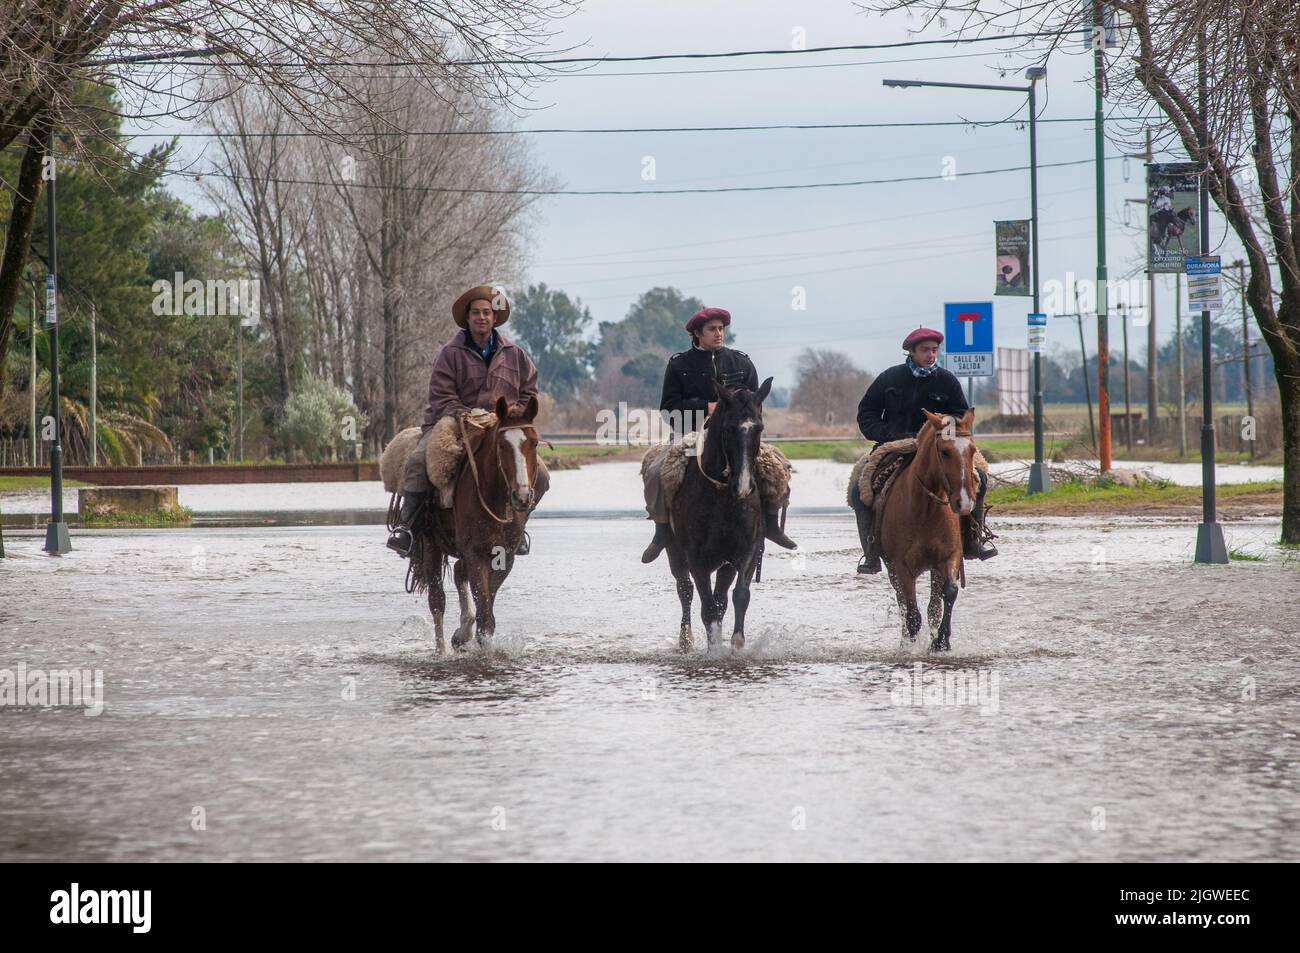 The Hispanic men riding a horse on the street because of floods in San Antonio de Areco, Buenos Aires, Argentina Stock Photo